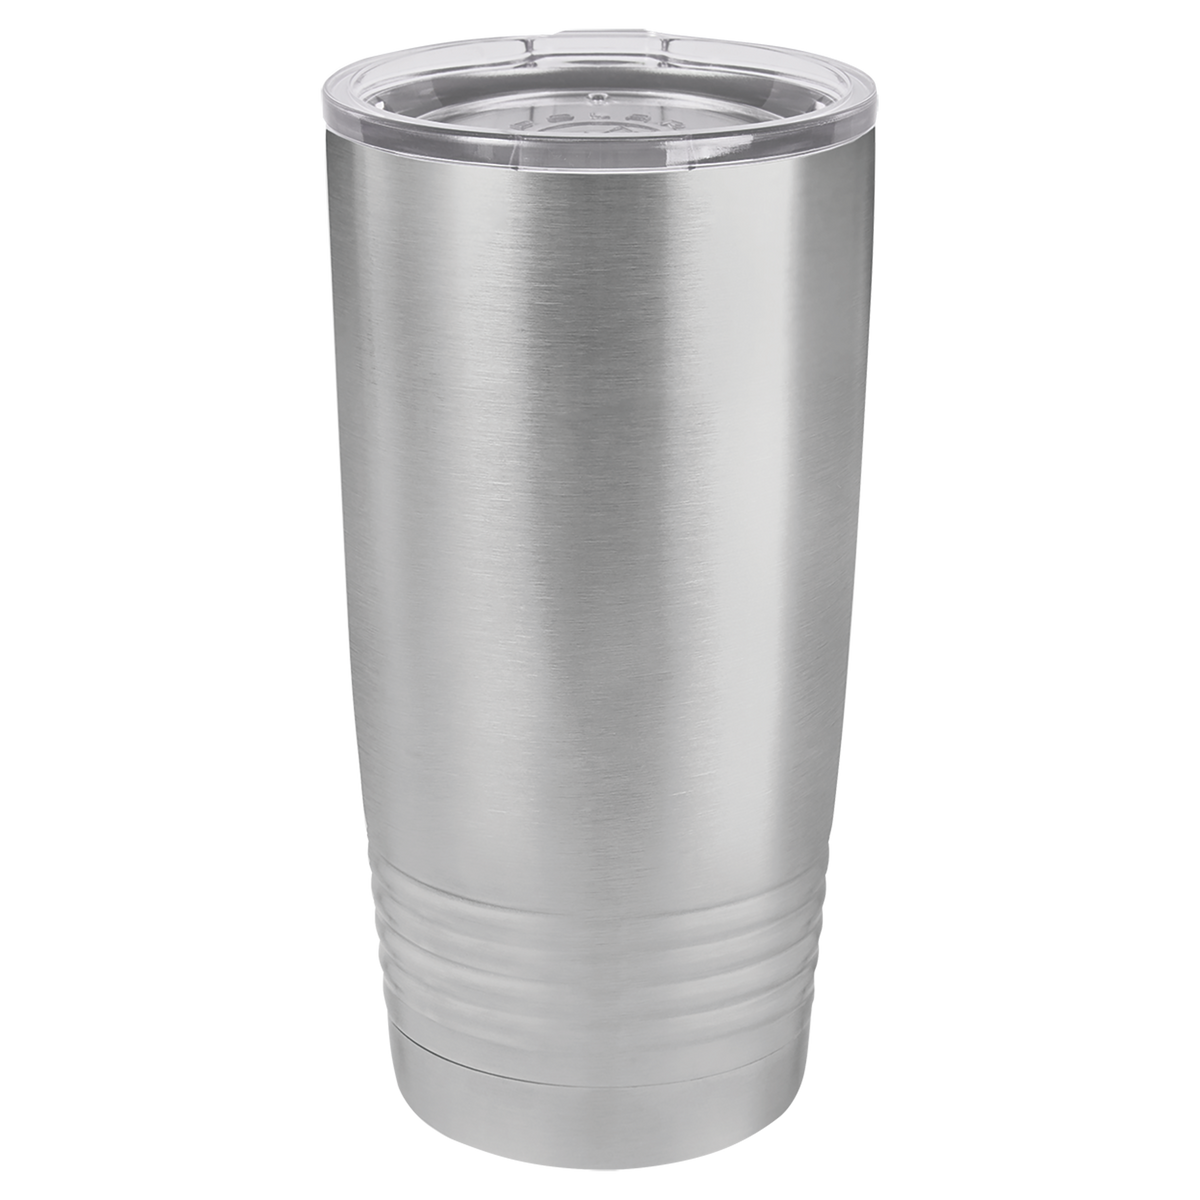 Custom engraved tumblers with your logo or image Laser Engraved / 20oz. or 30oz. in 18 color options